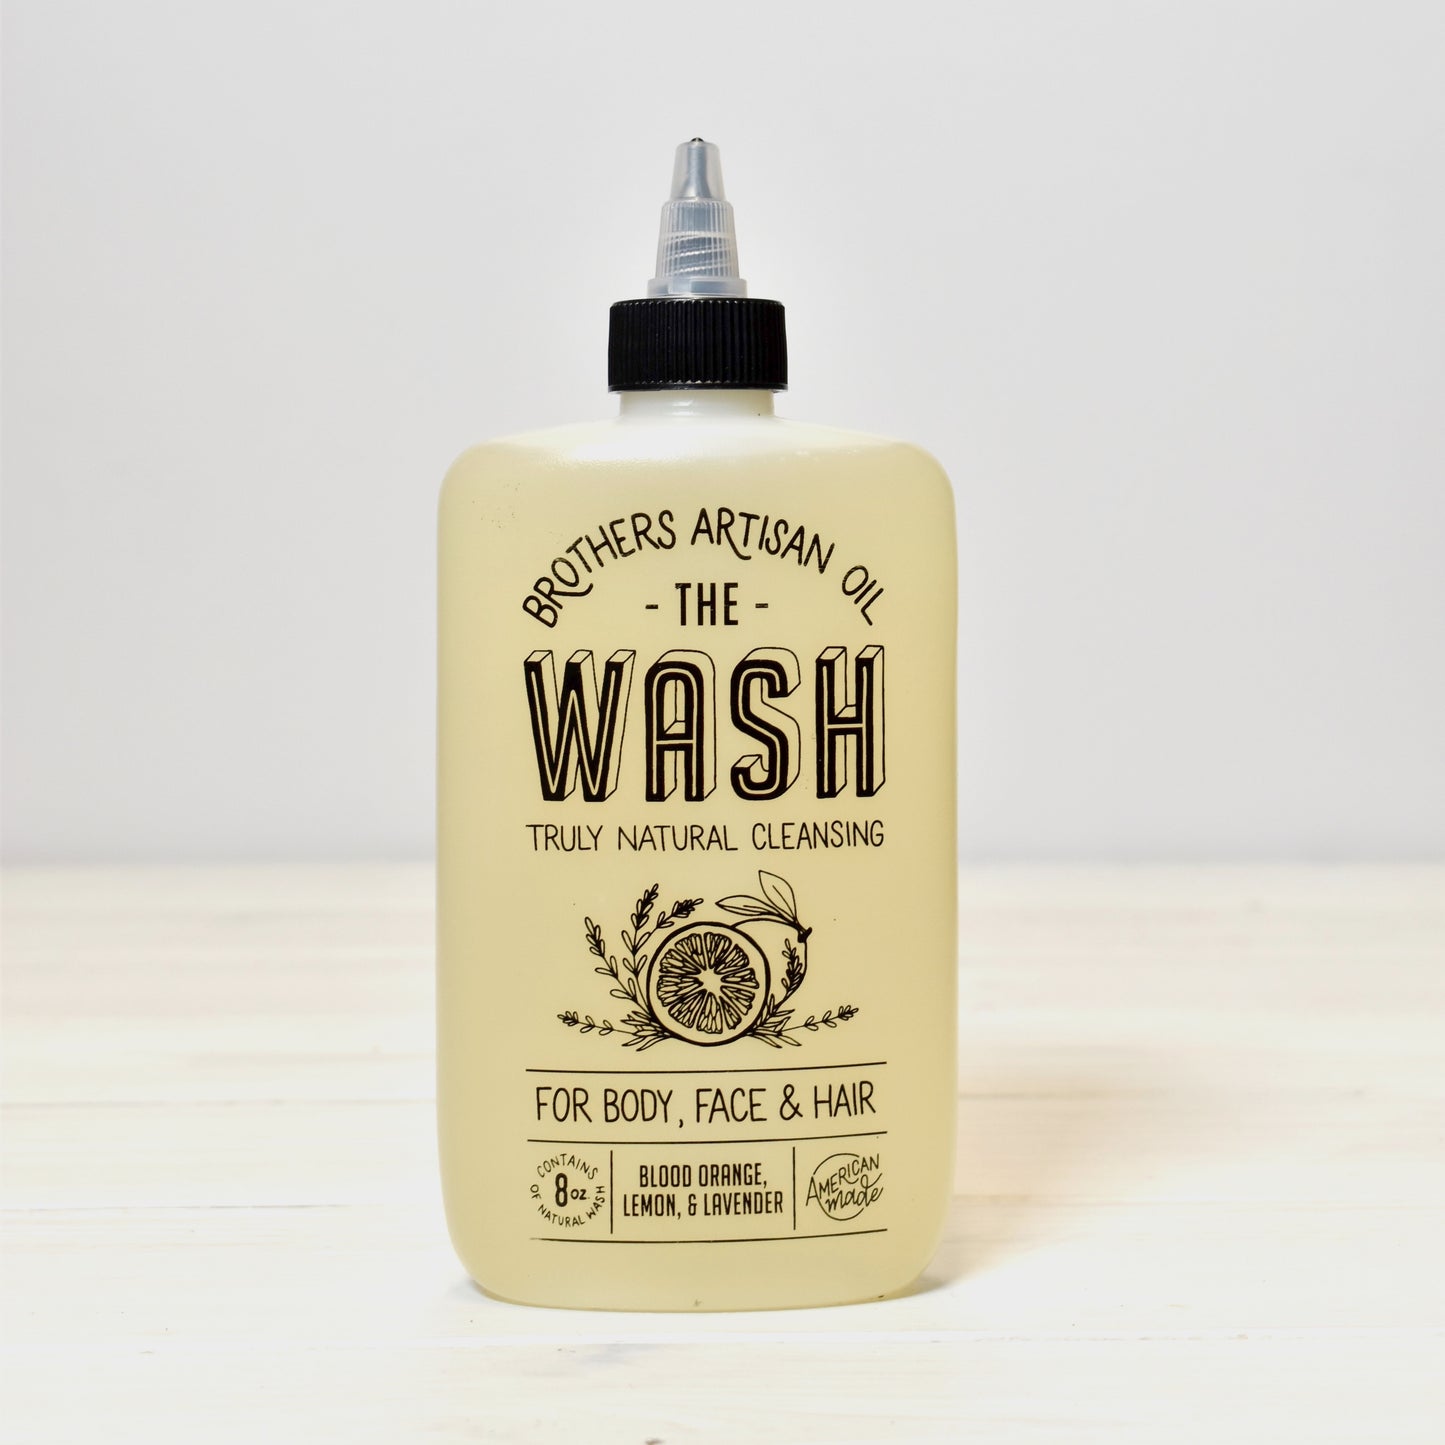 The Purifying Wash from Brothers Artisan Oil